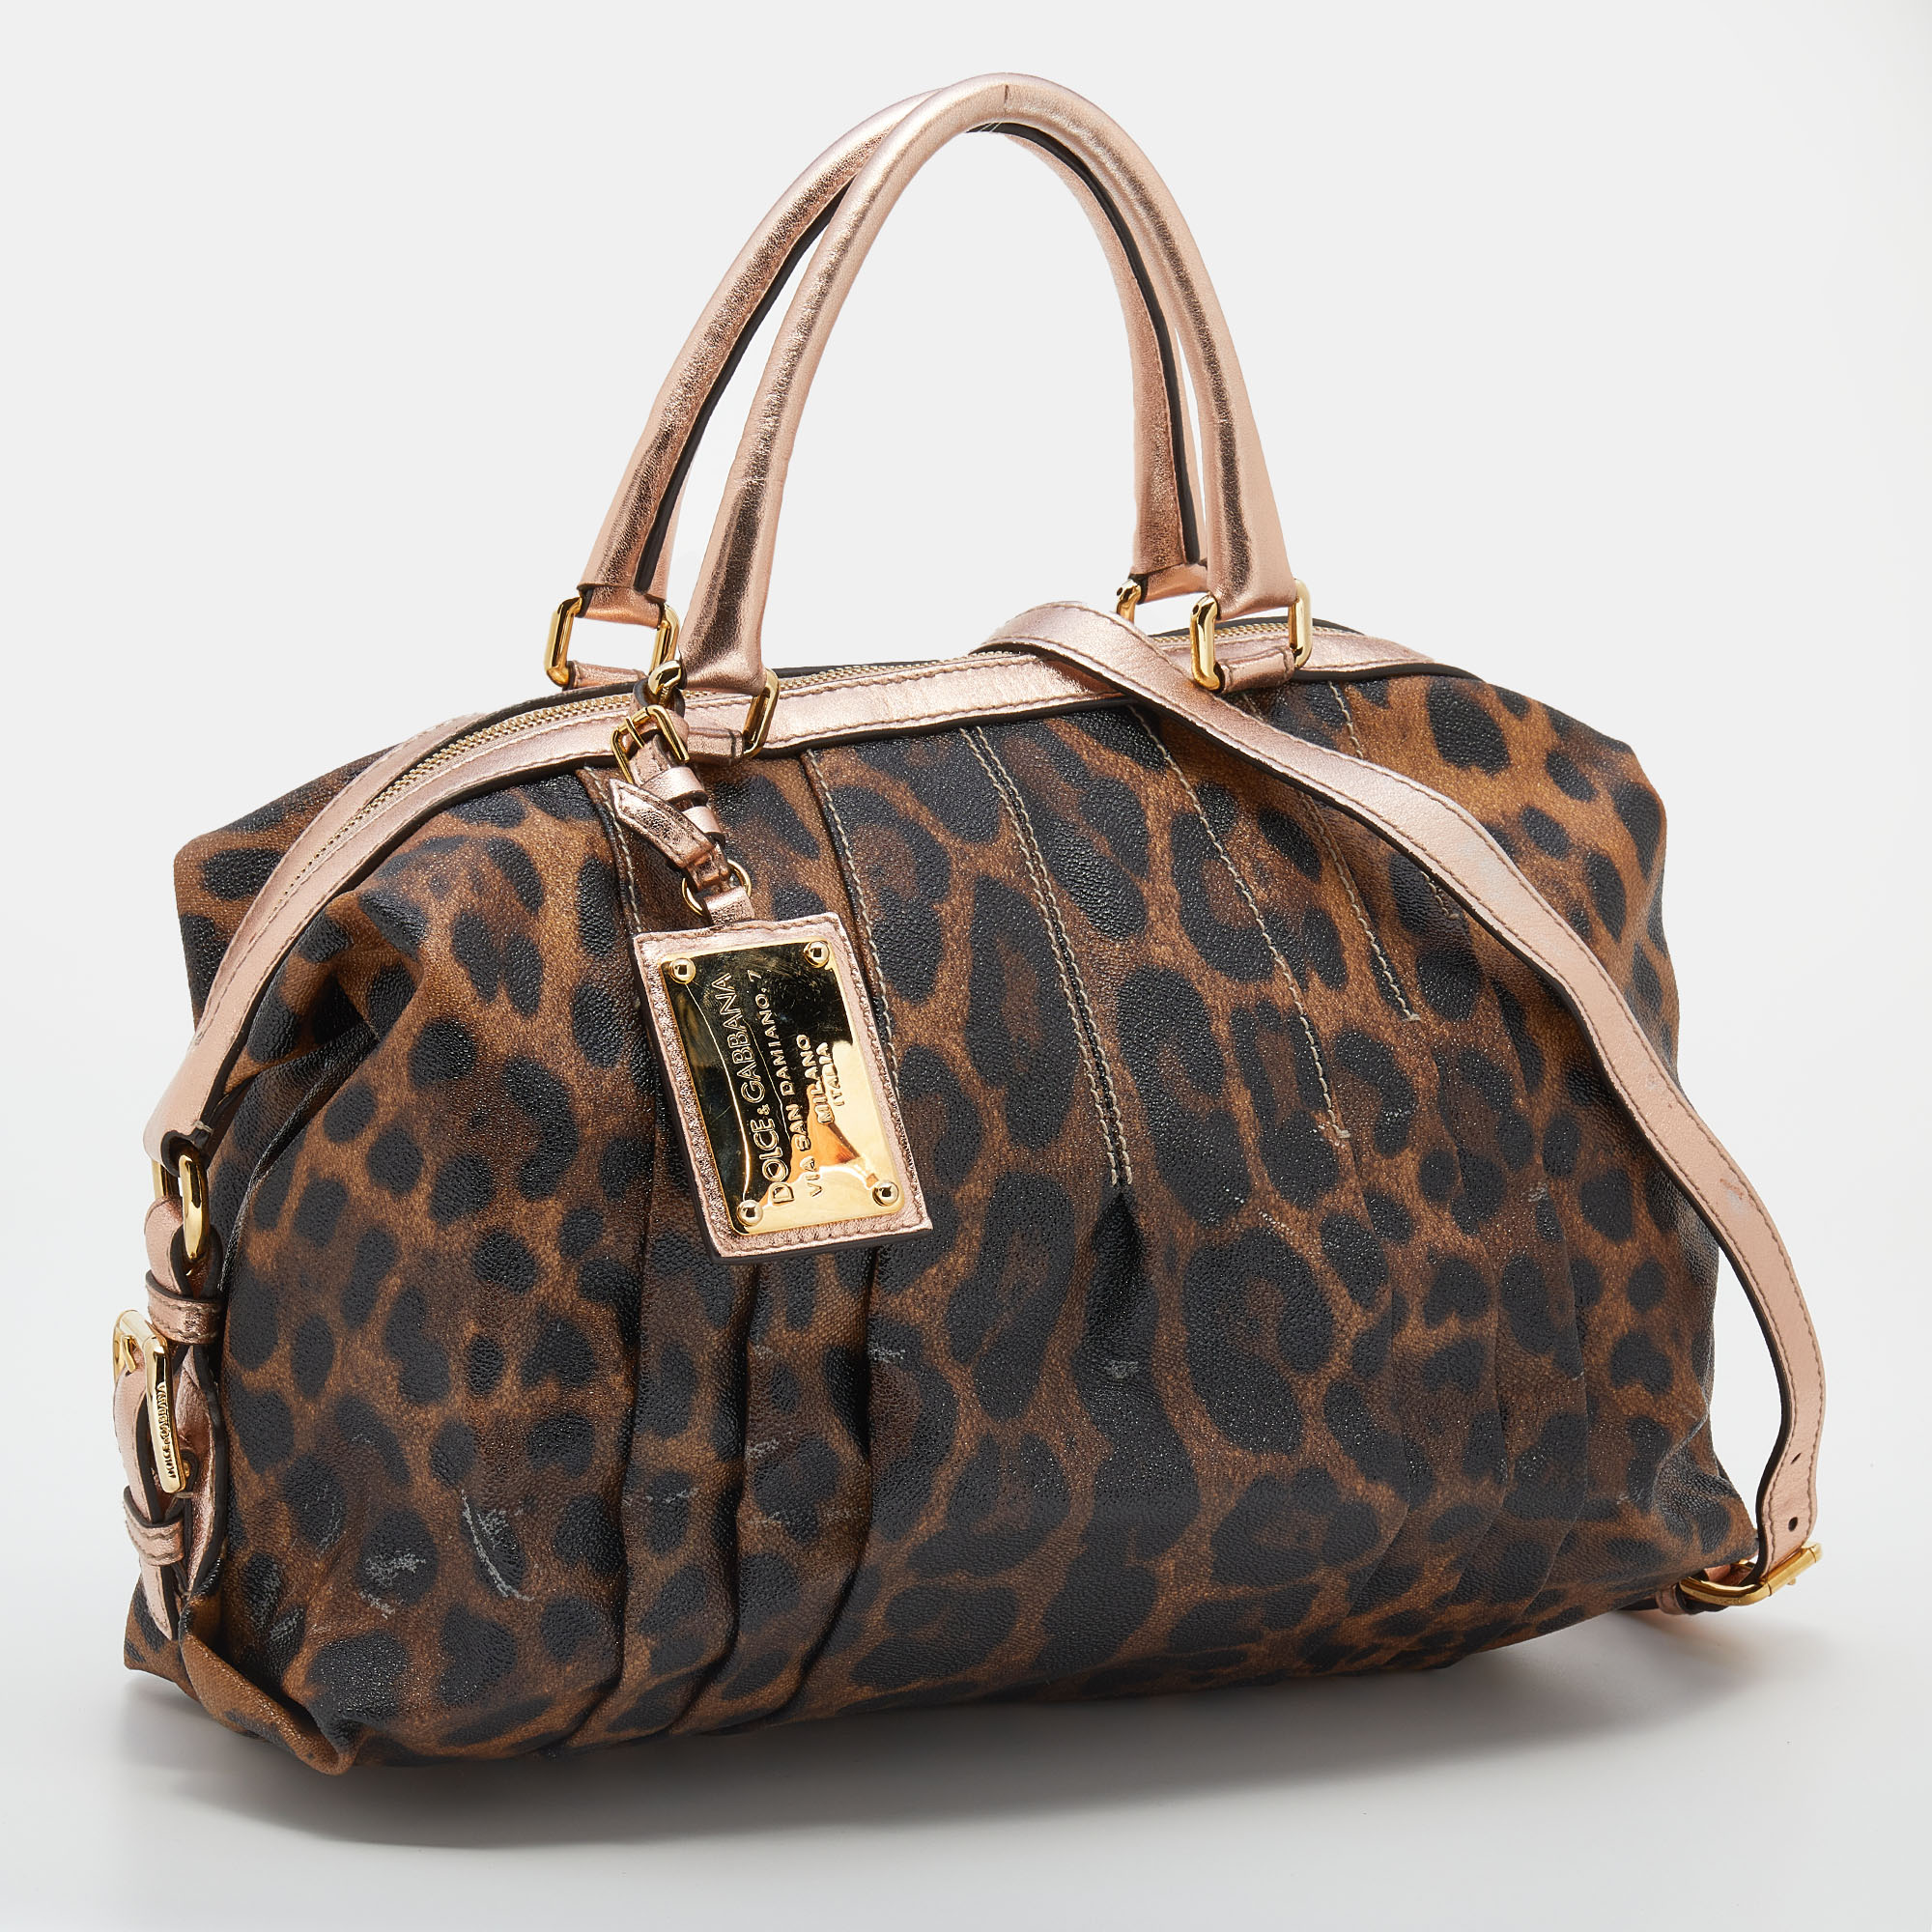 Dolce & Gabbana Brown/Rose Gold Leopard Print Coated Canvas And Leather Satchel